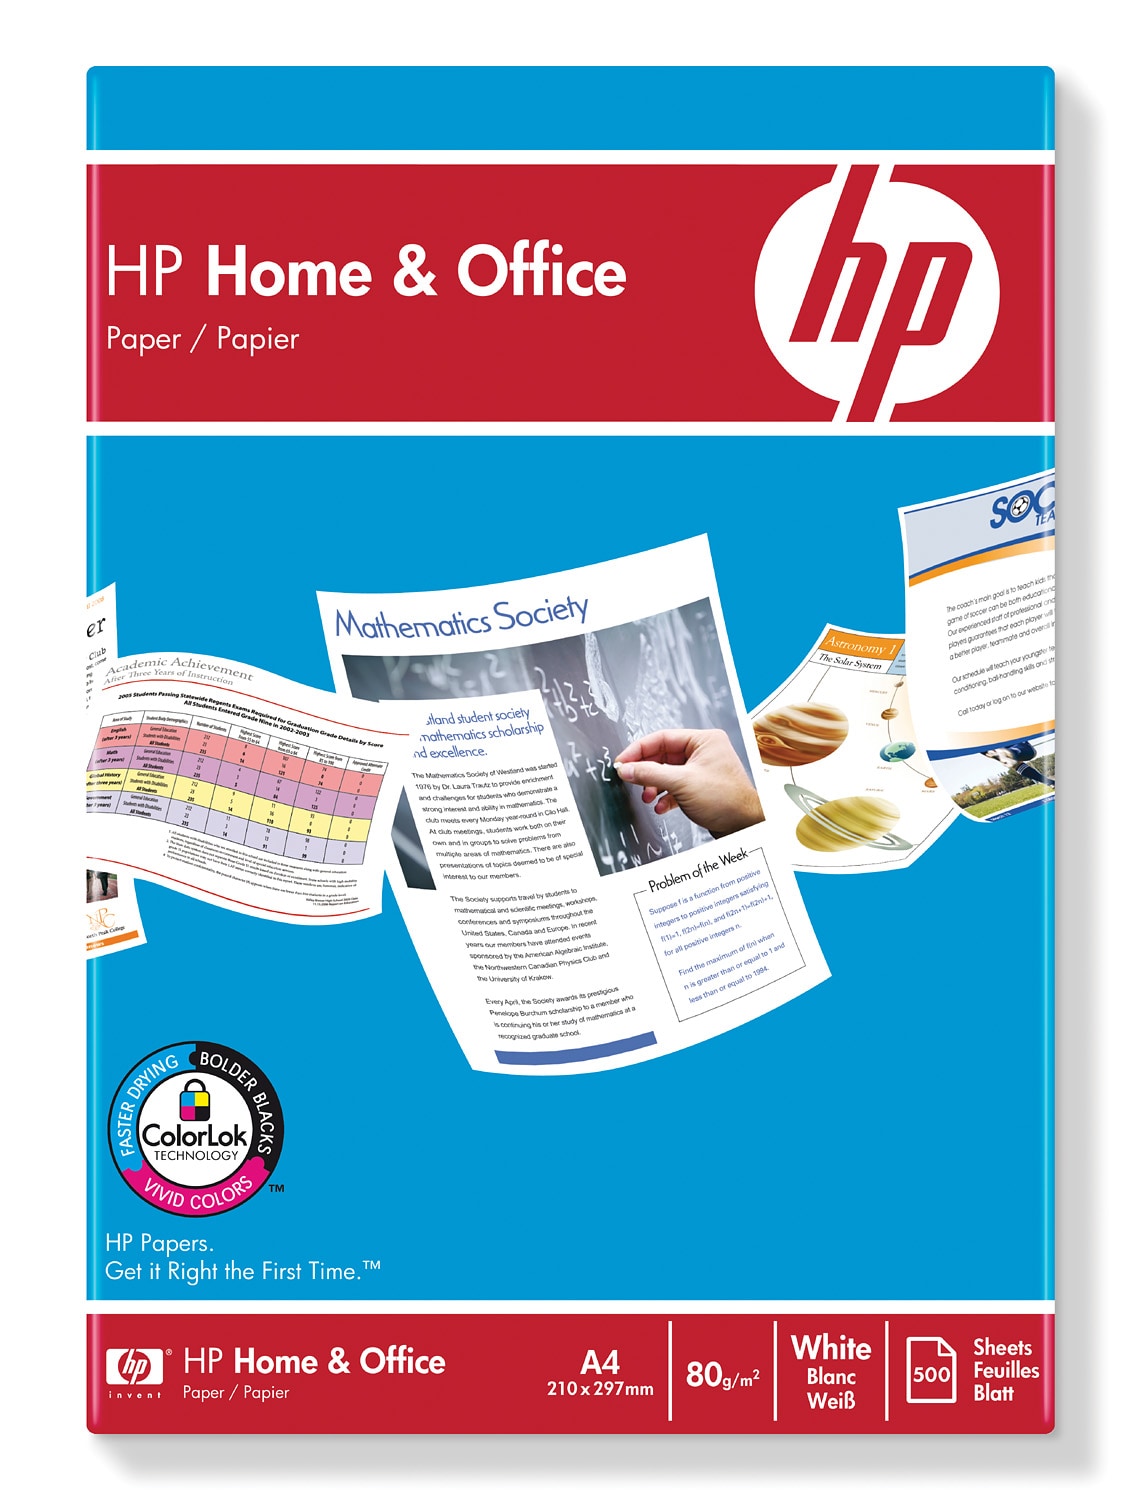 HP Home and Office Paper-500 sht/A4/210 x 297 mm | HP® Africa